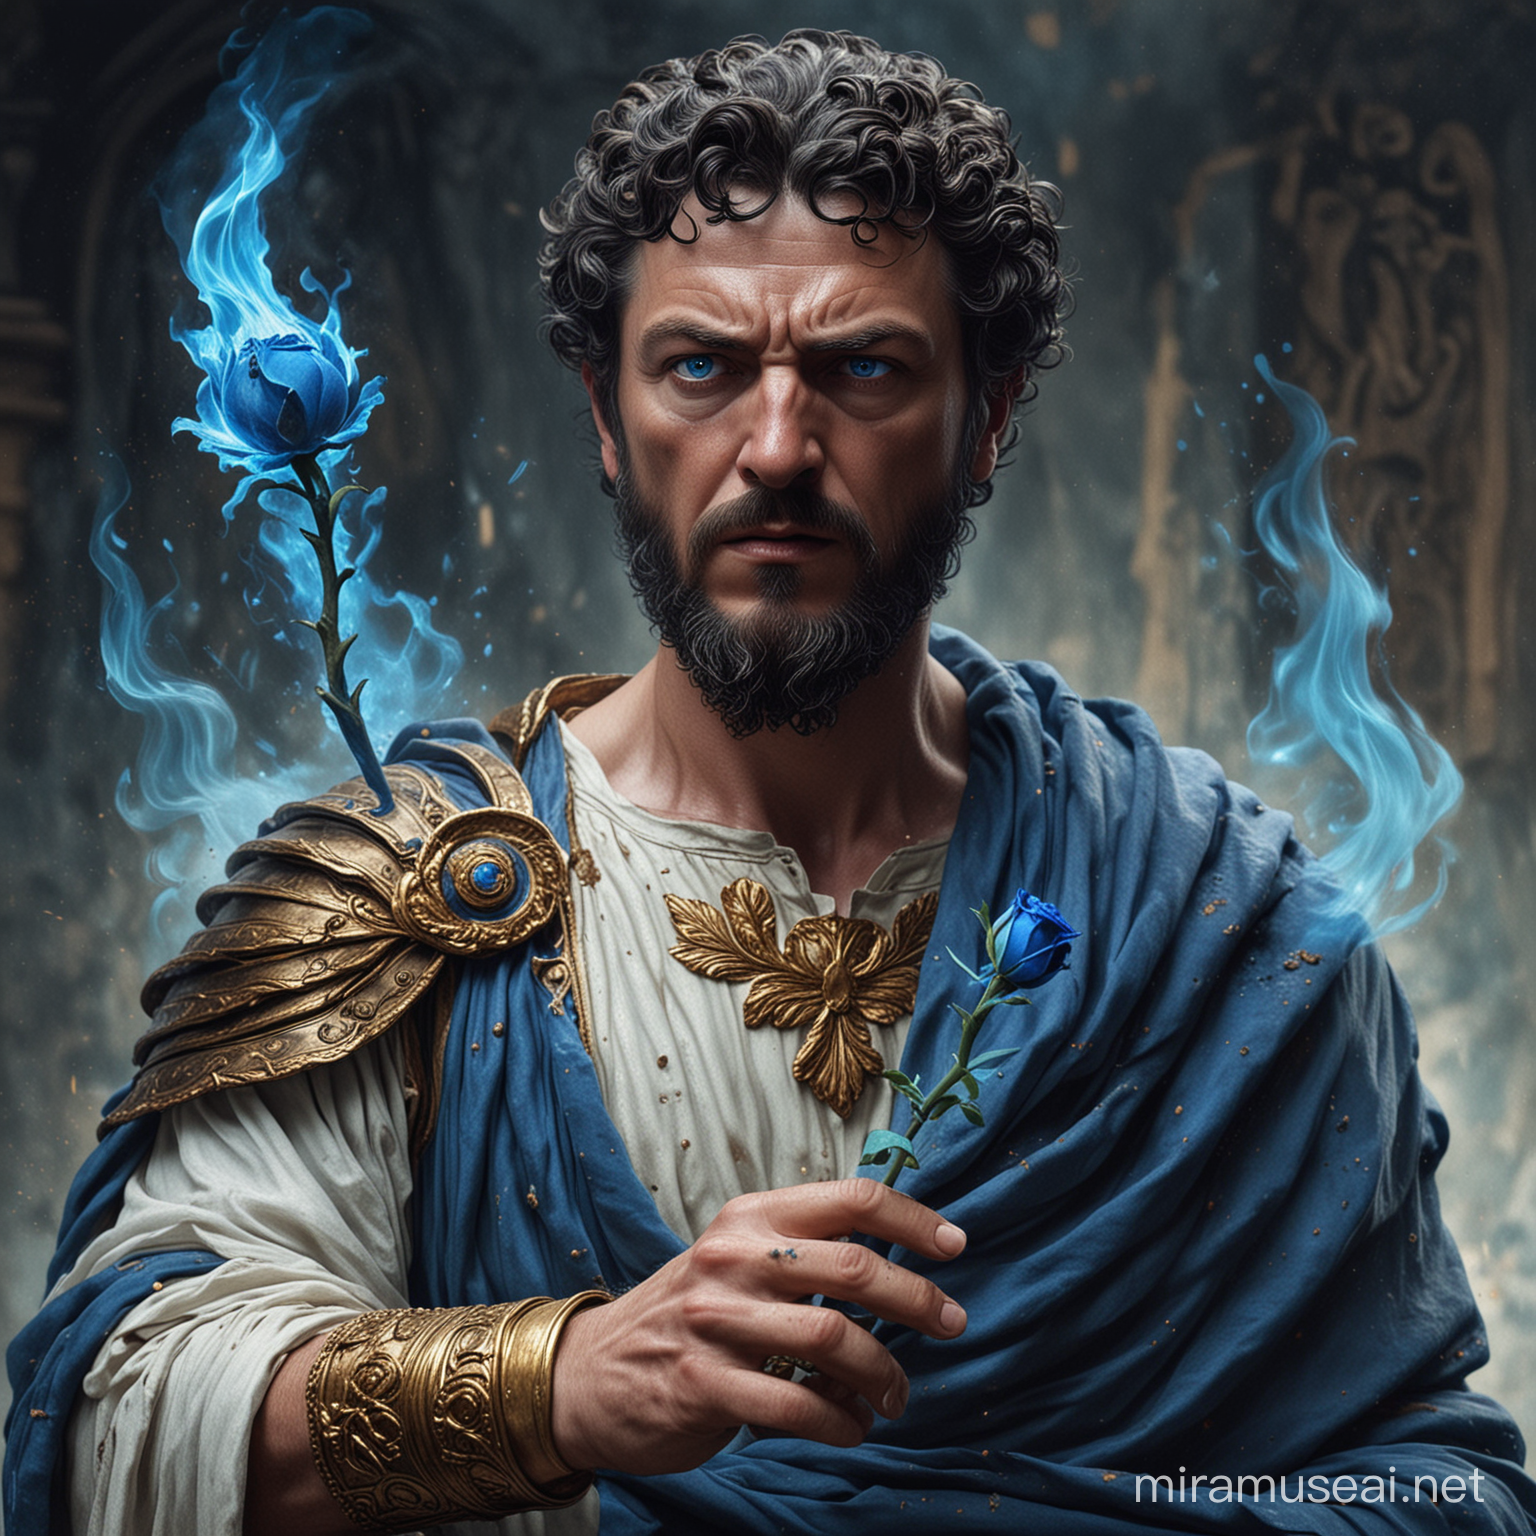 Angry Marcus Aurelius holding a Blue rose with his right hand and having blue flames coming out of his left arm
